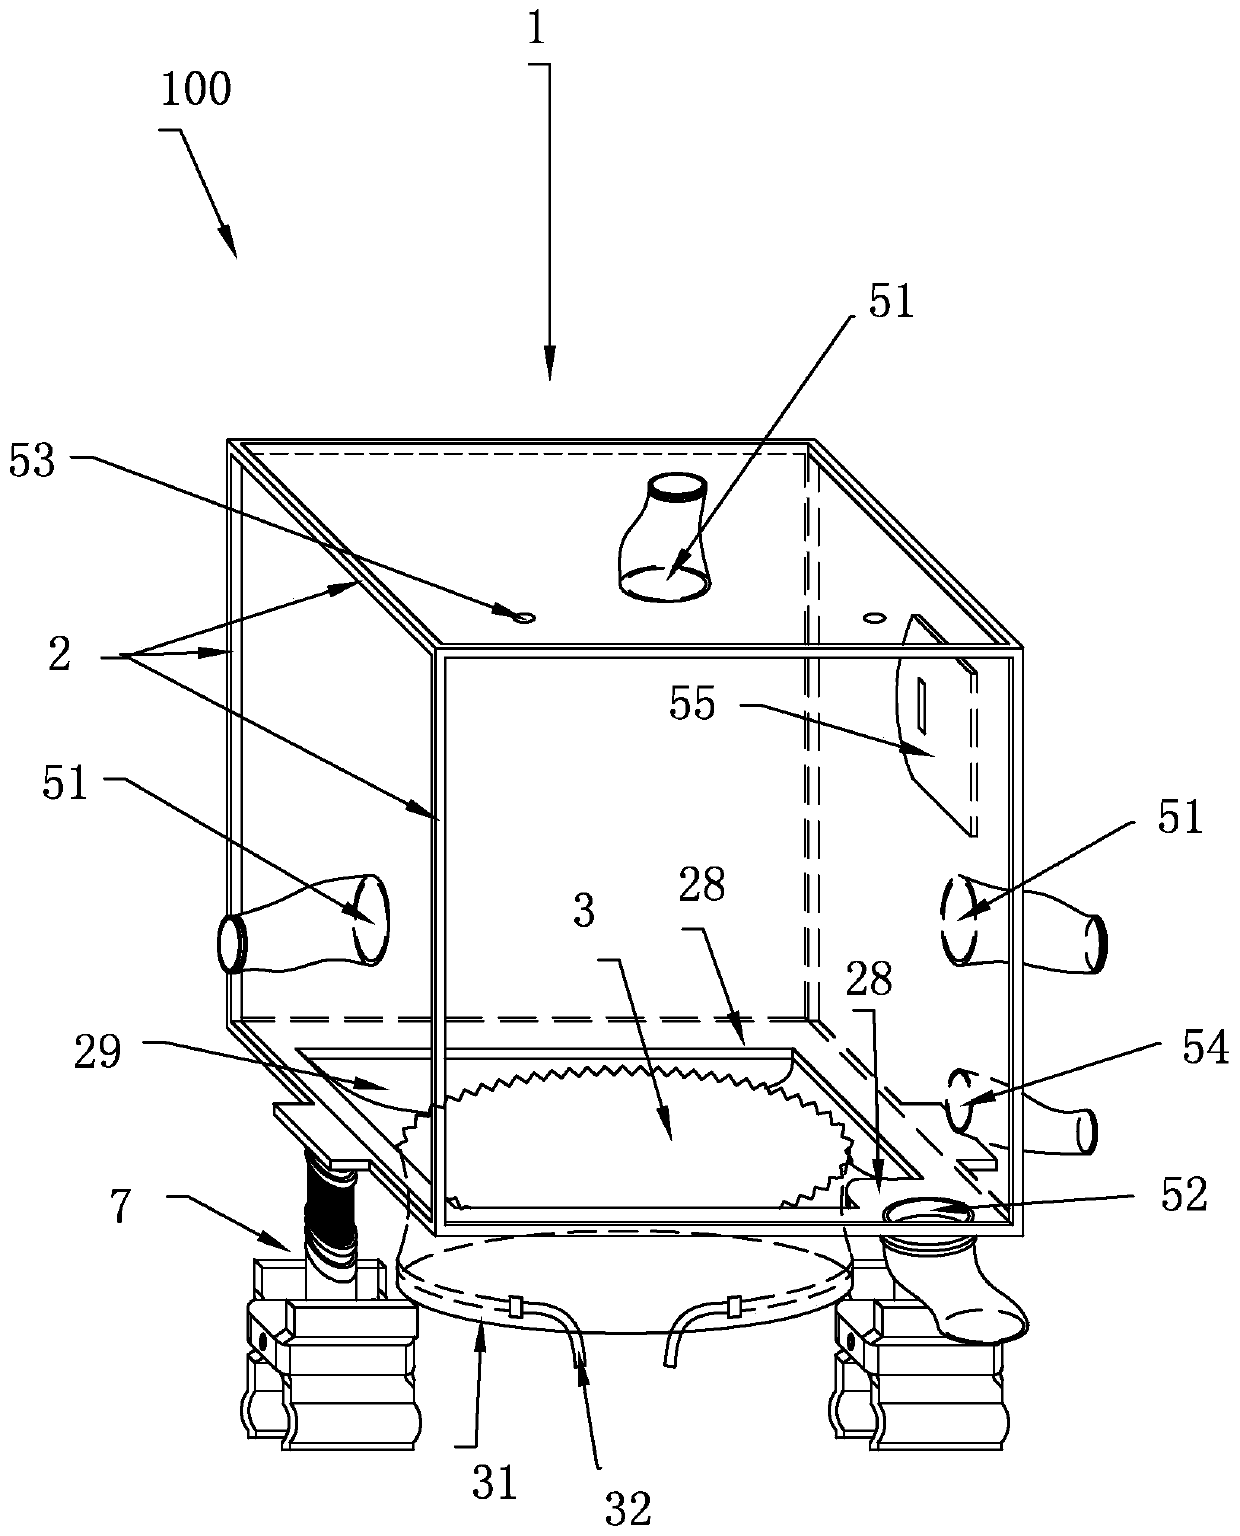 Protection isolation device for oral operation treatment